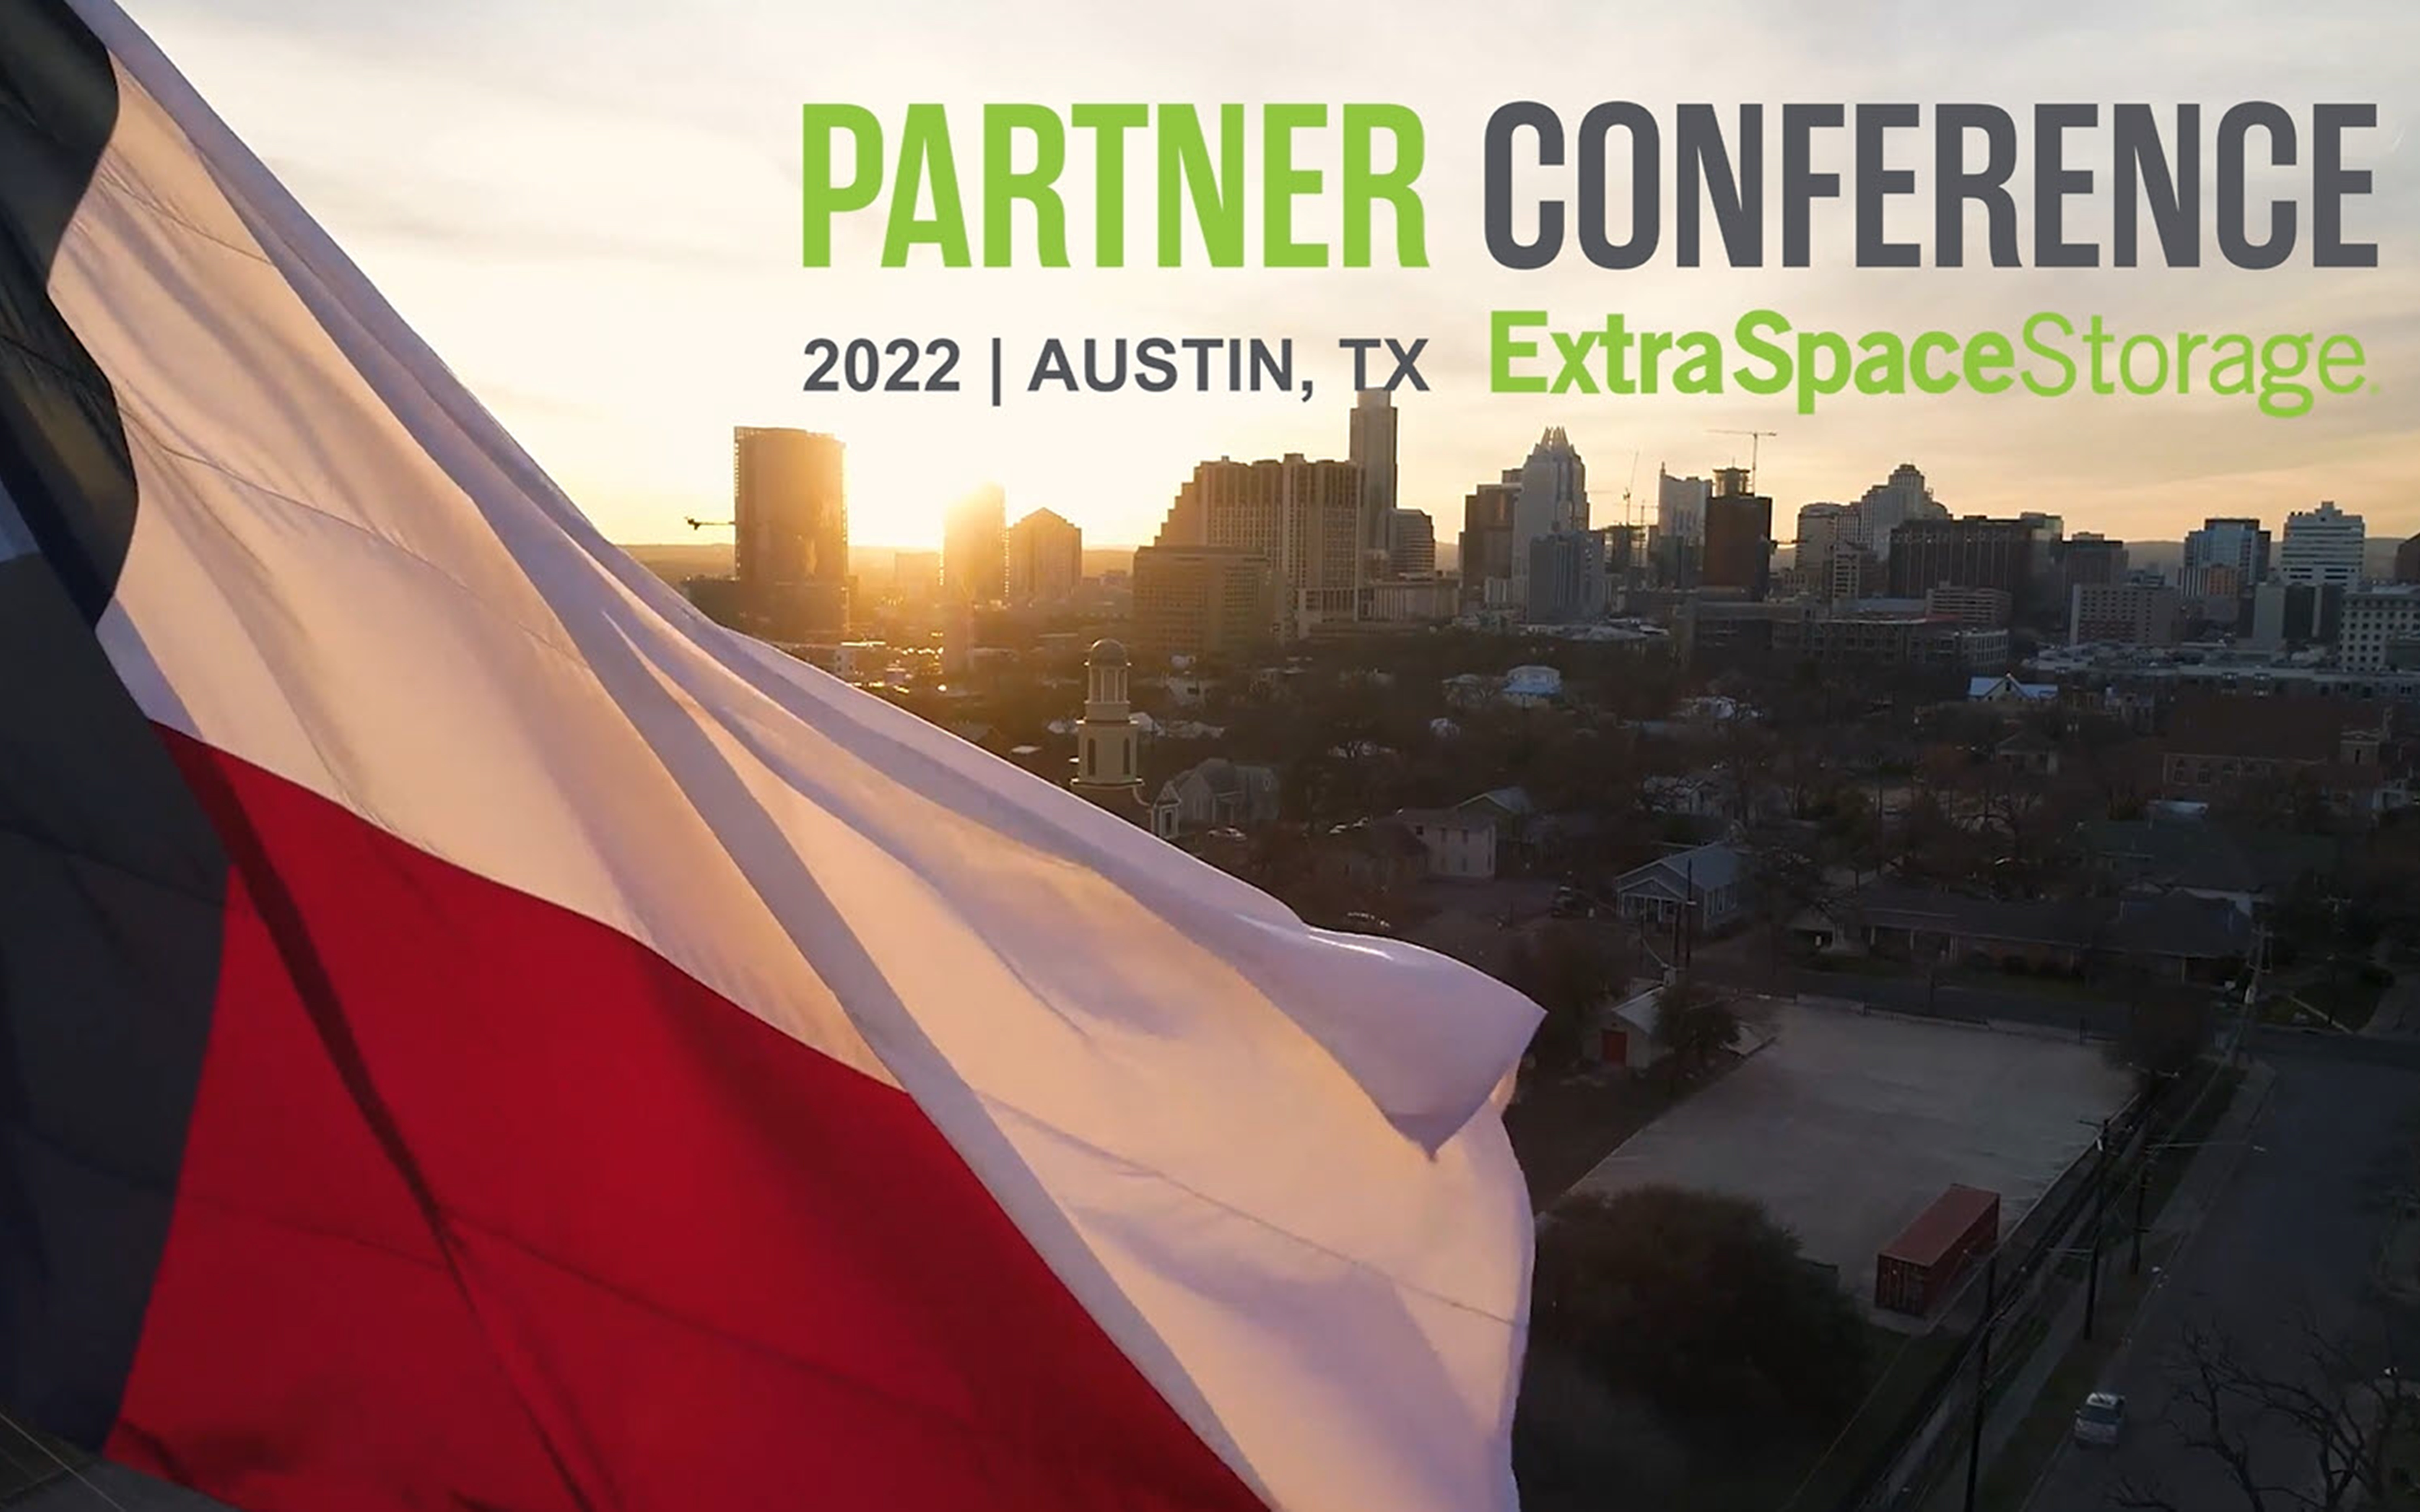 Extra Space Storage Hosts 2022 Partner Conference in Austin